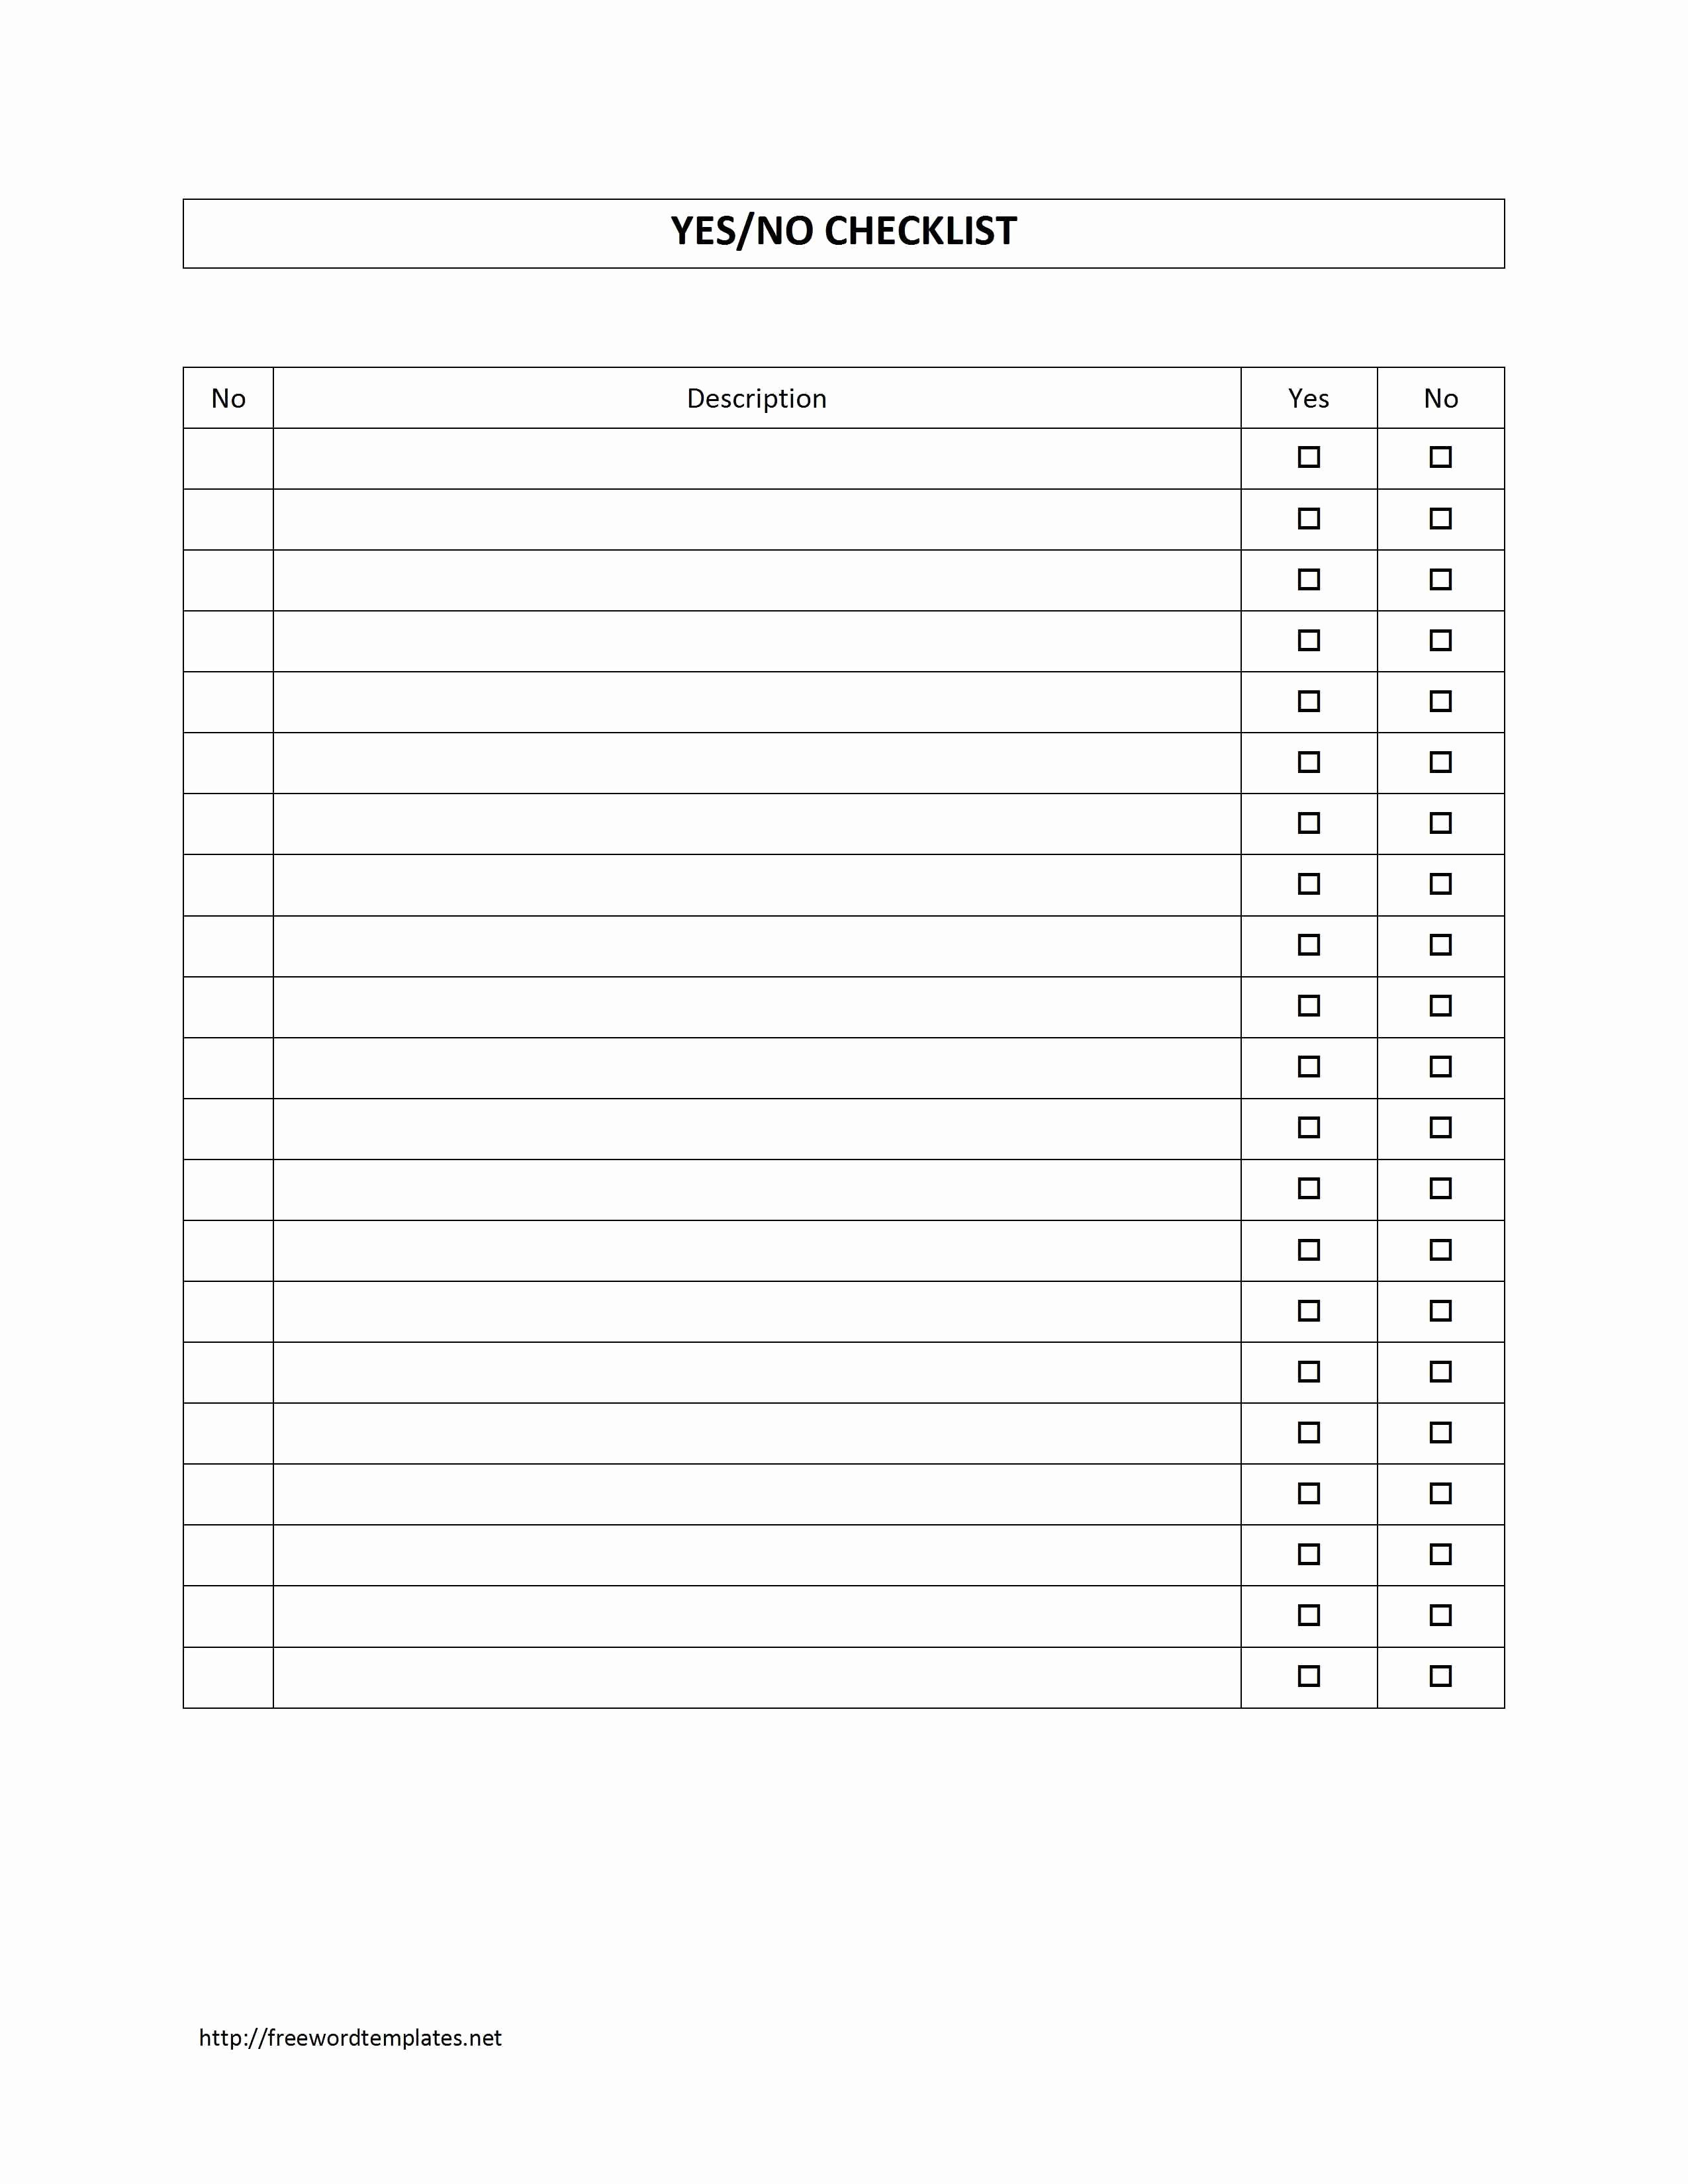 Editable Checklist Template Word New Survey Sheet with Yes No Checklist Template